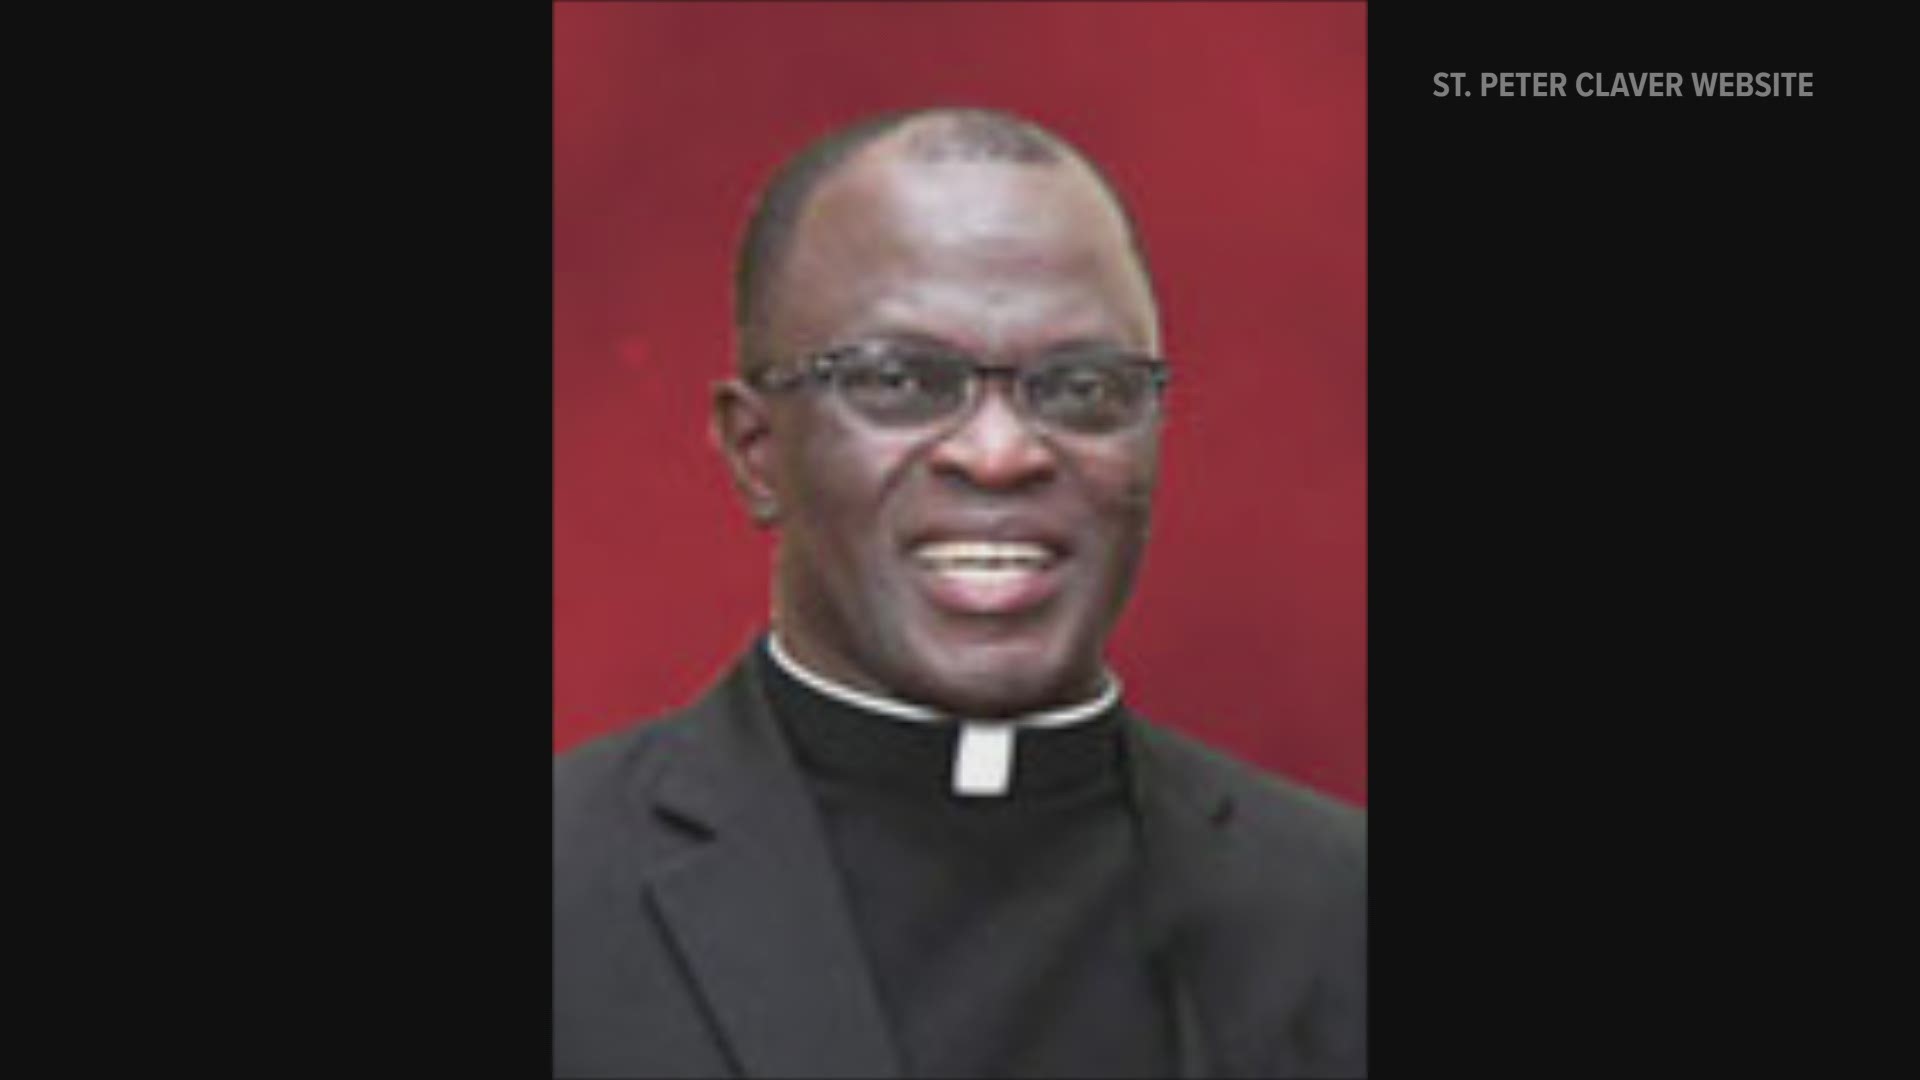 The Archdiocese of New Orleans has removed a priest from service after an allegation of abuse filed recently.